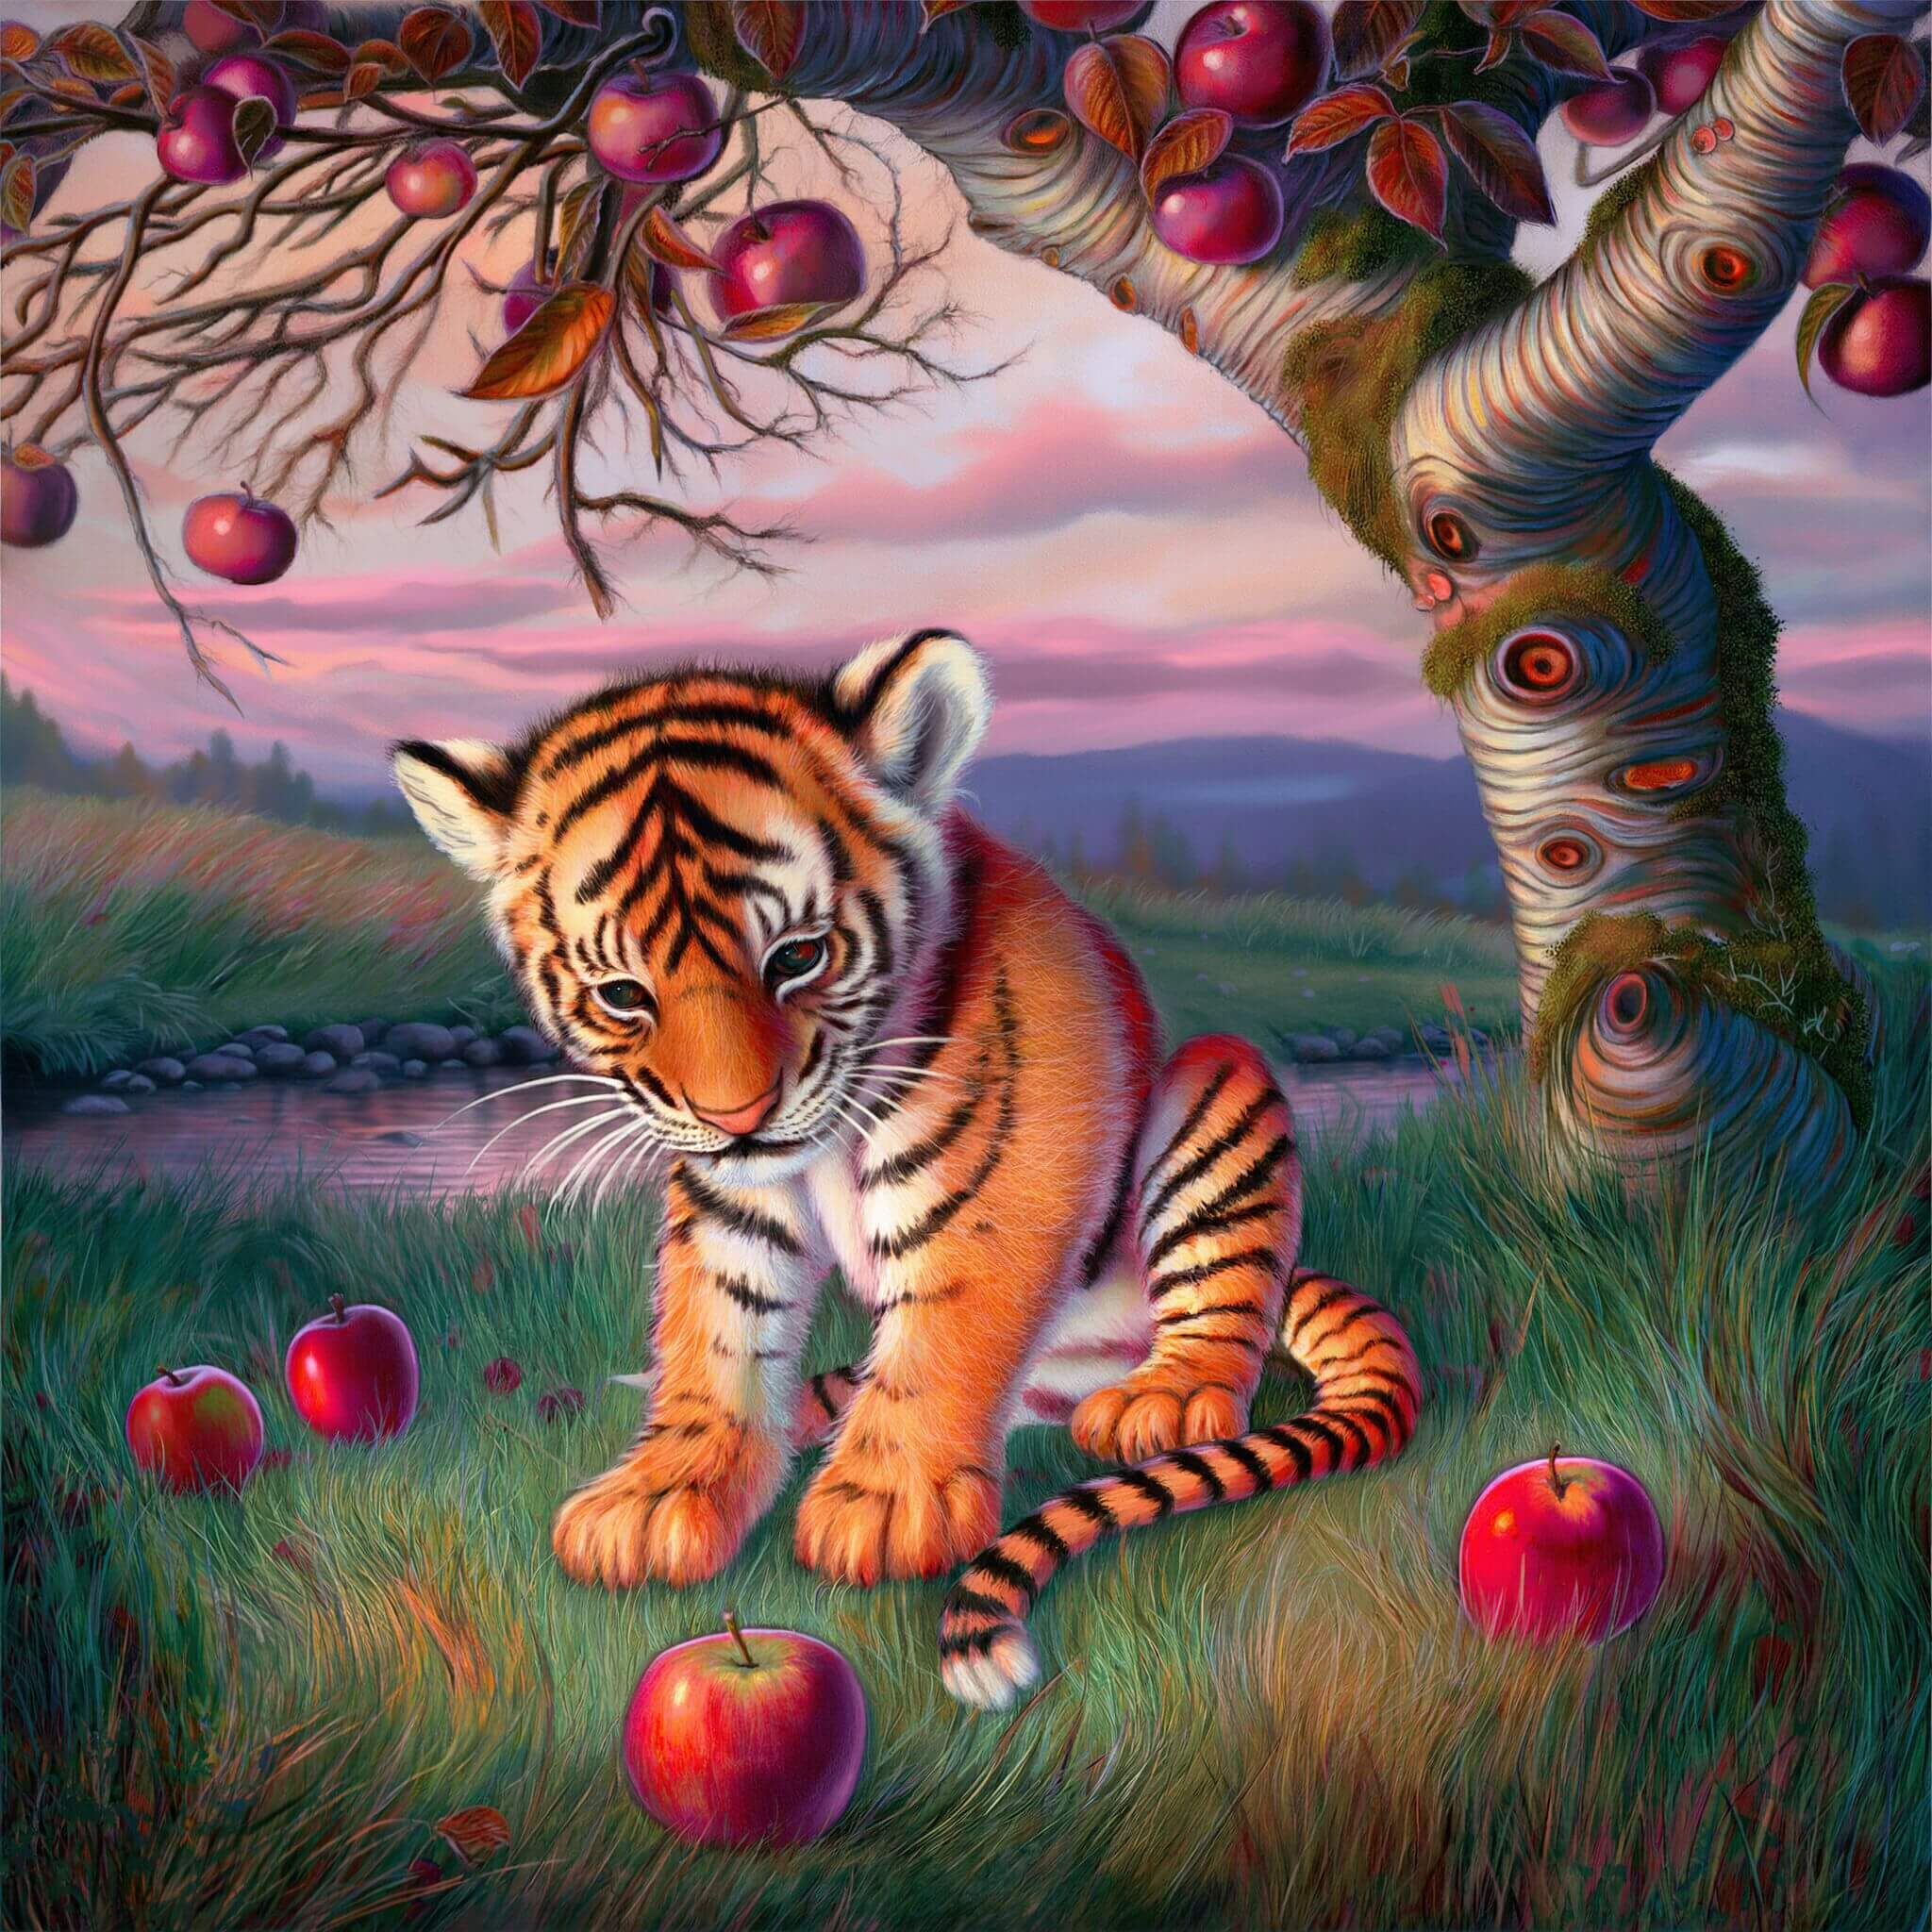 Digital art of a young tiger under an apple tree in a matte painting style with gorgeous details